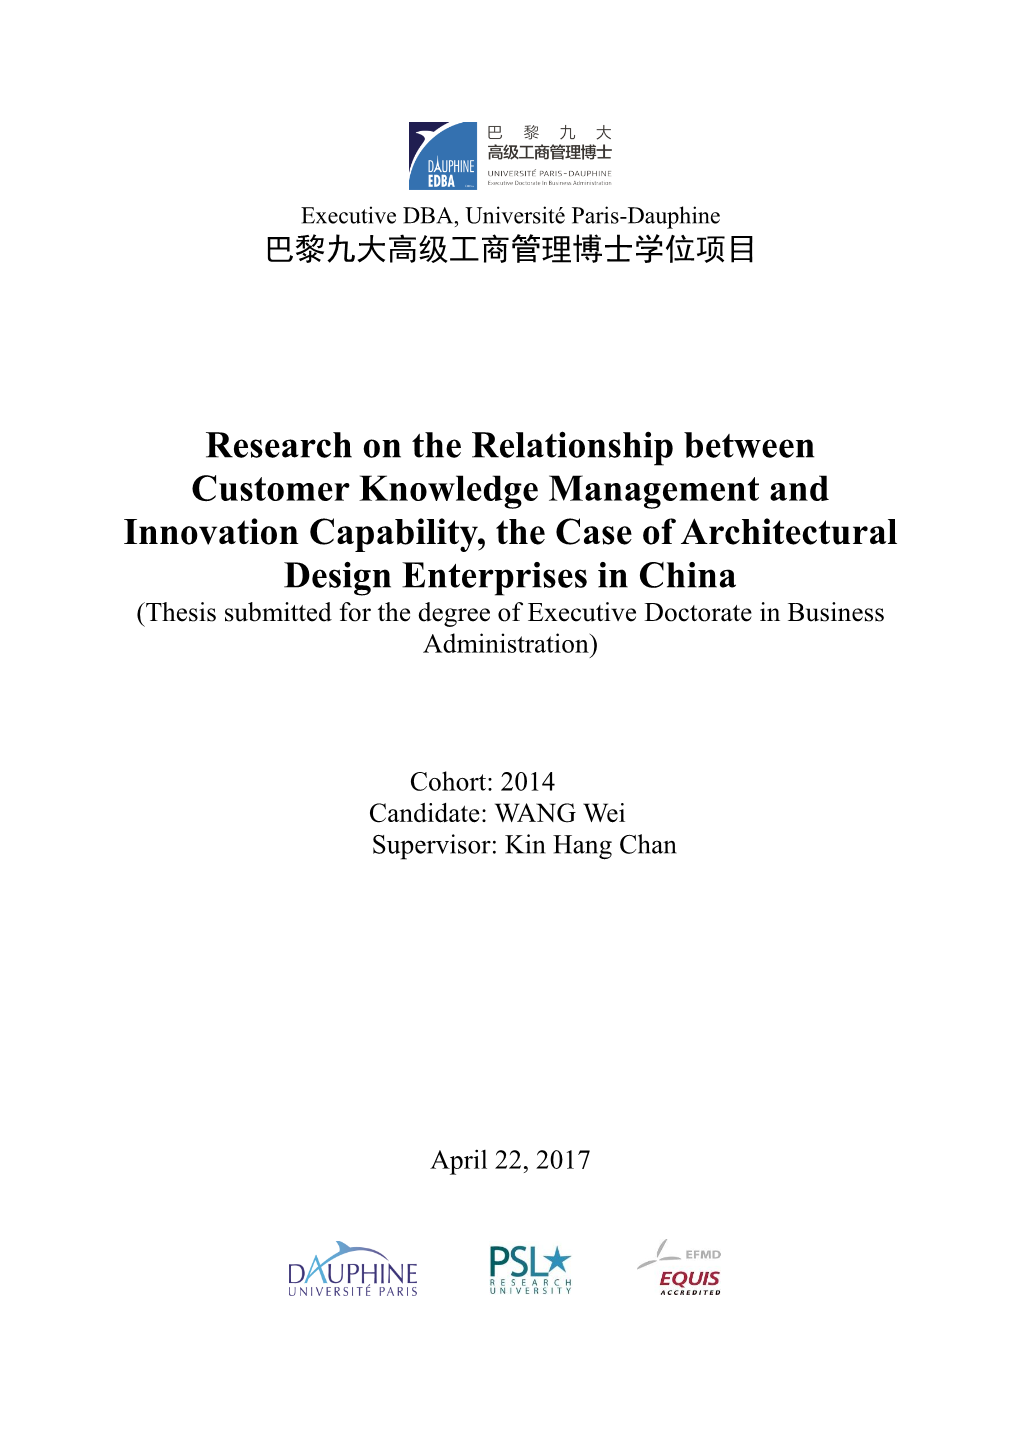 Research on the Relationship Between Customer Knowledge